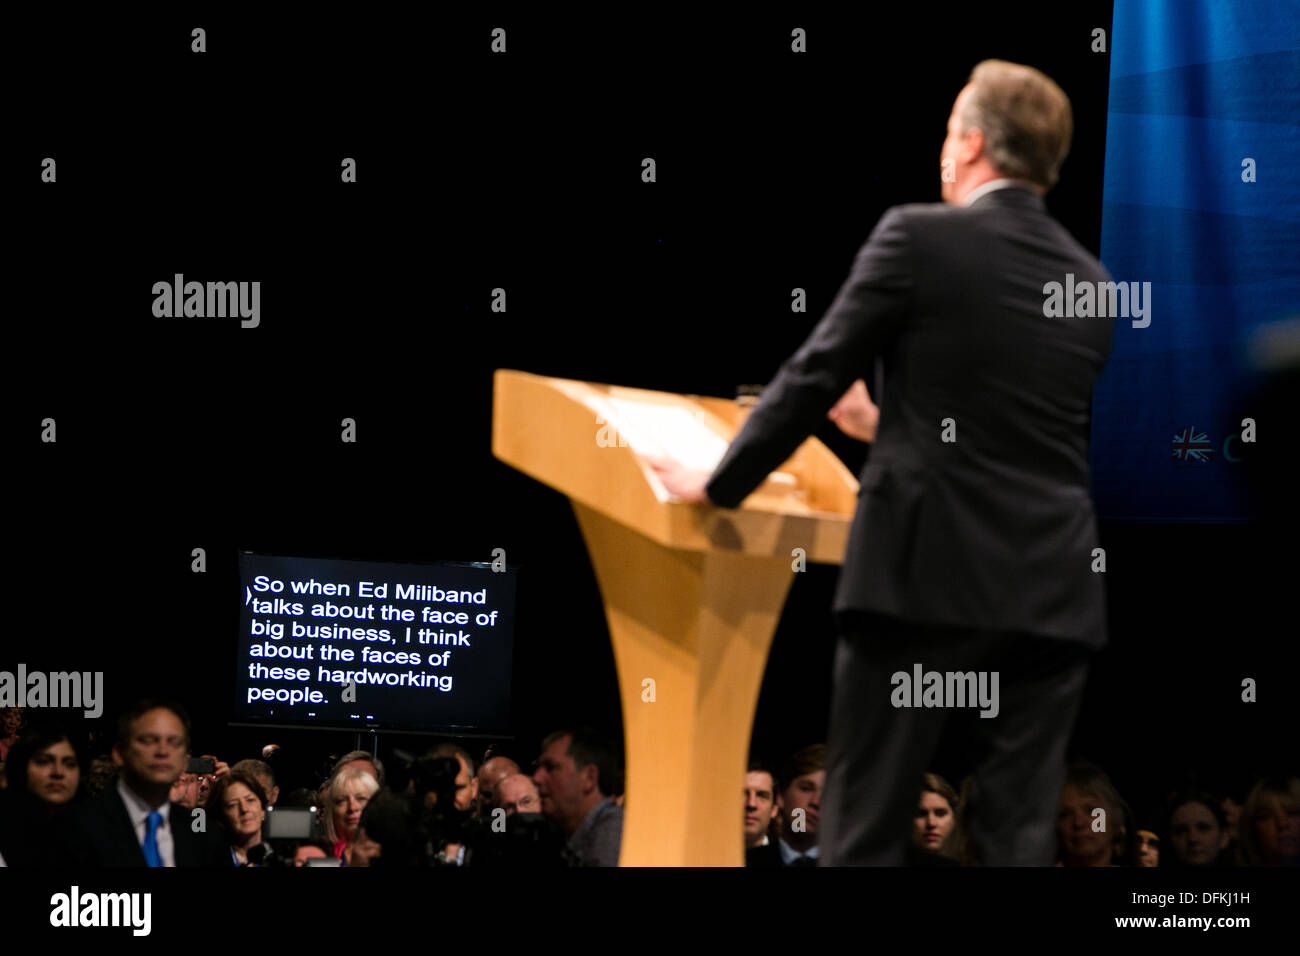 02/10/13 . Prime Minister David Cameron .The Prime Minister closes the Conservative Party Conference at Manchester Stock Photo